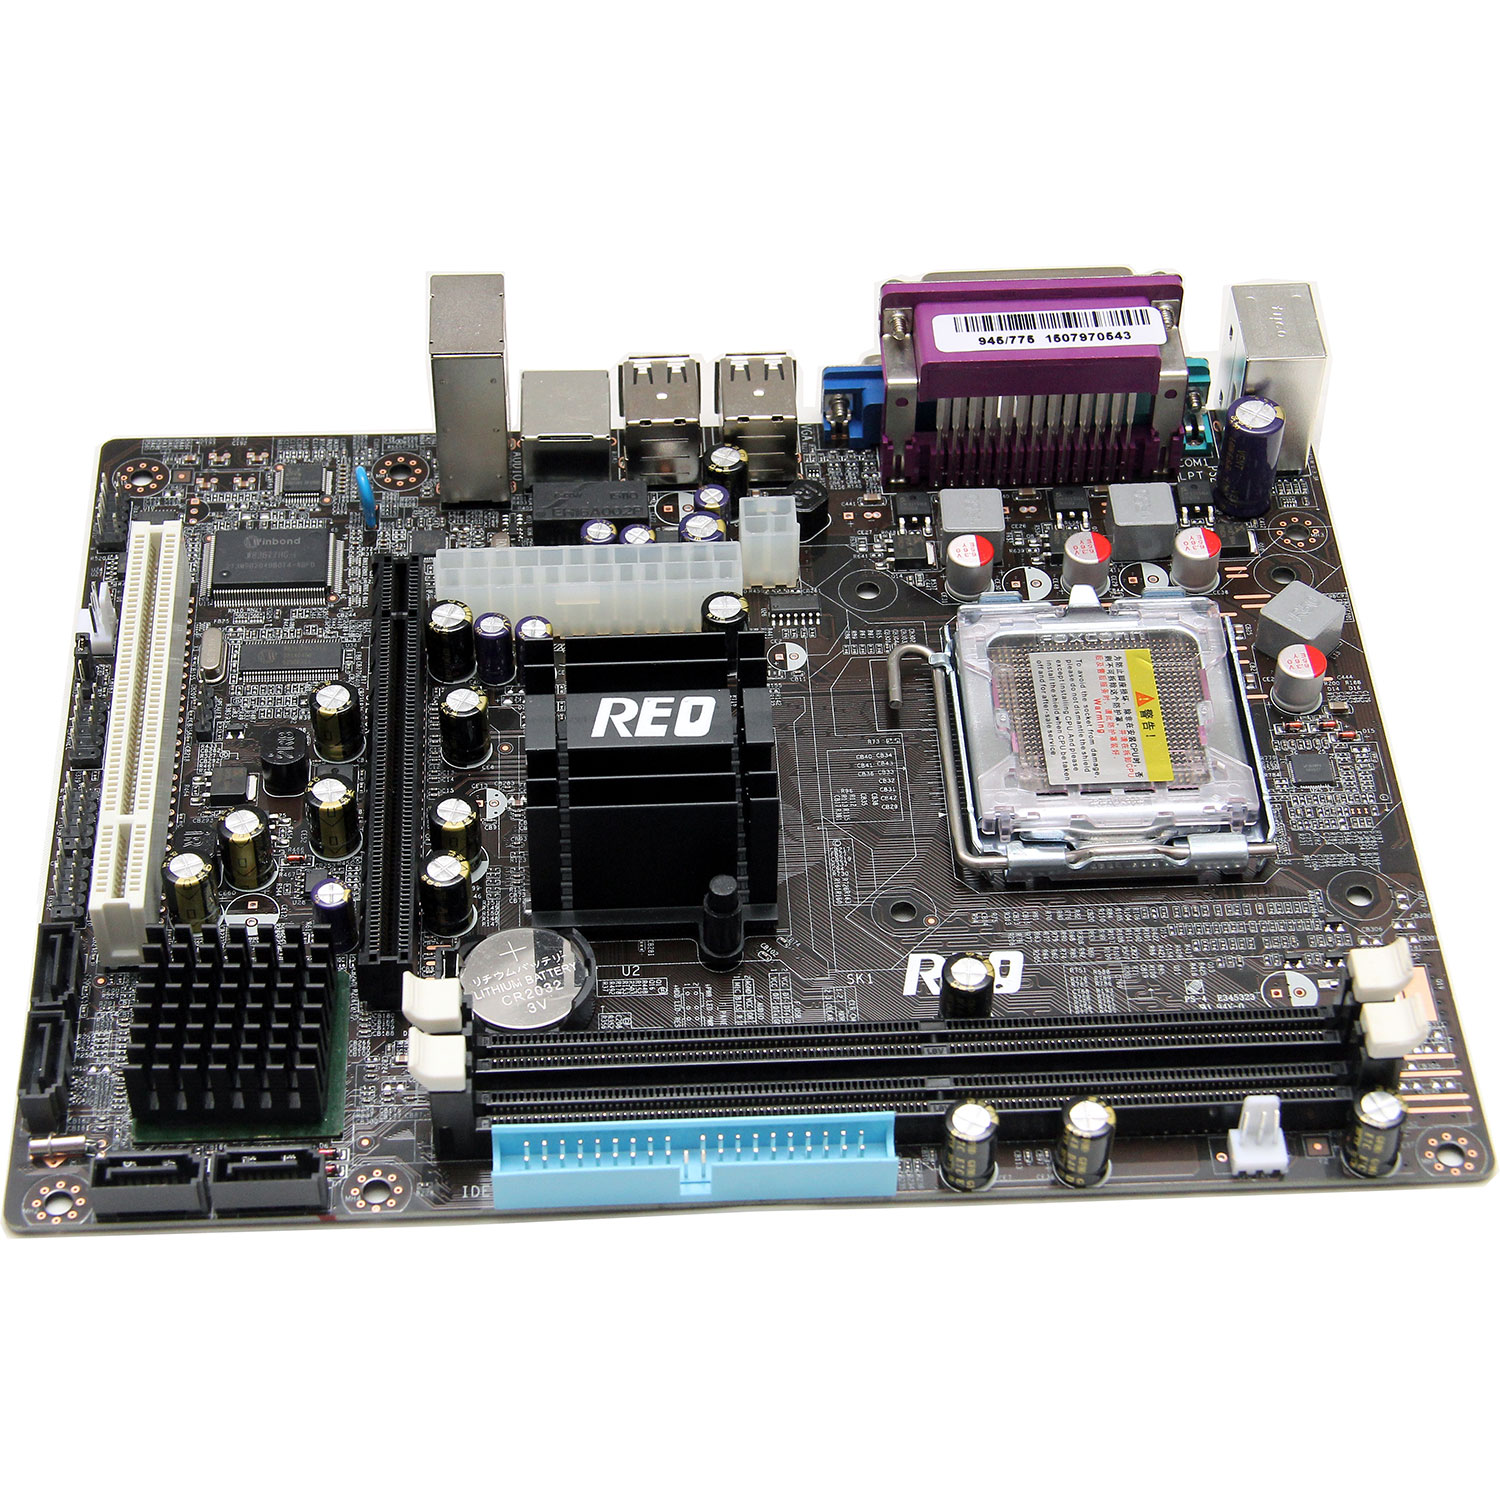 915 motherboard vga driver for windows 7 download